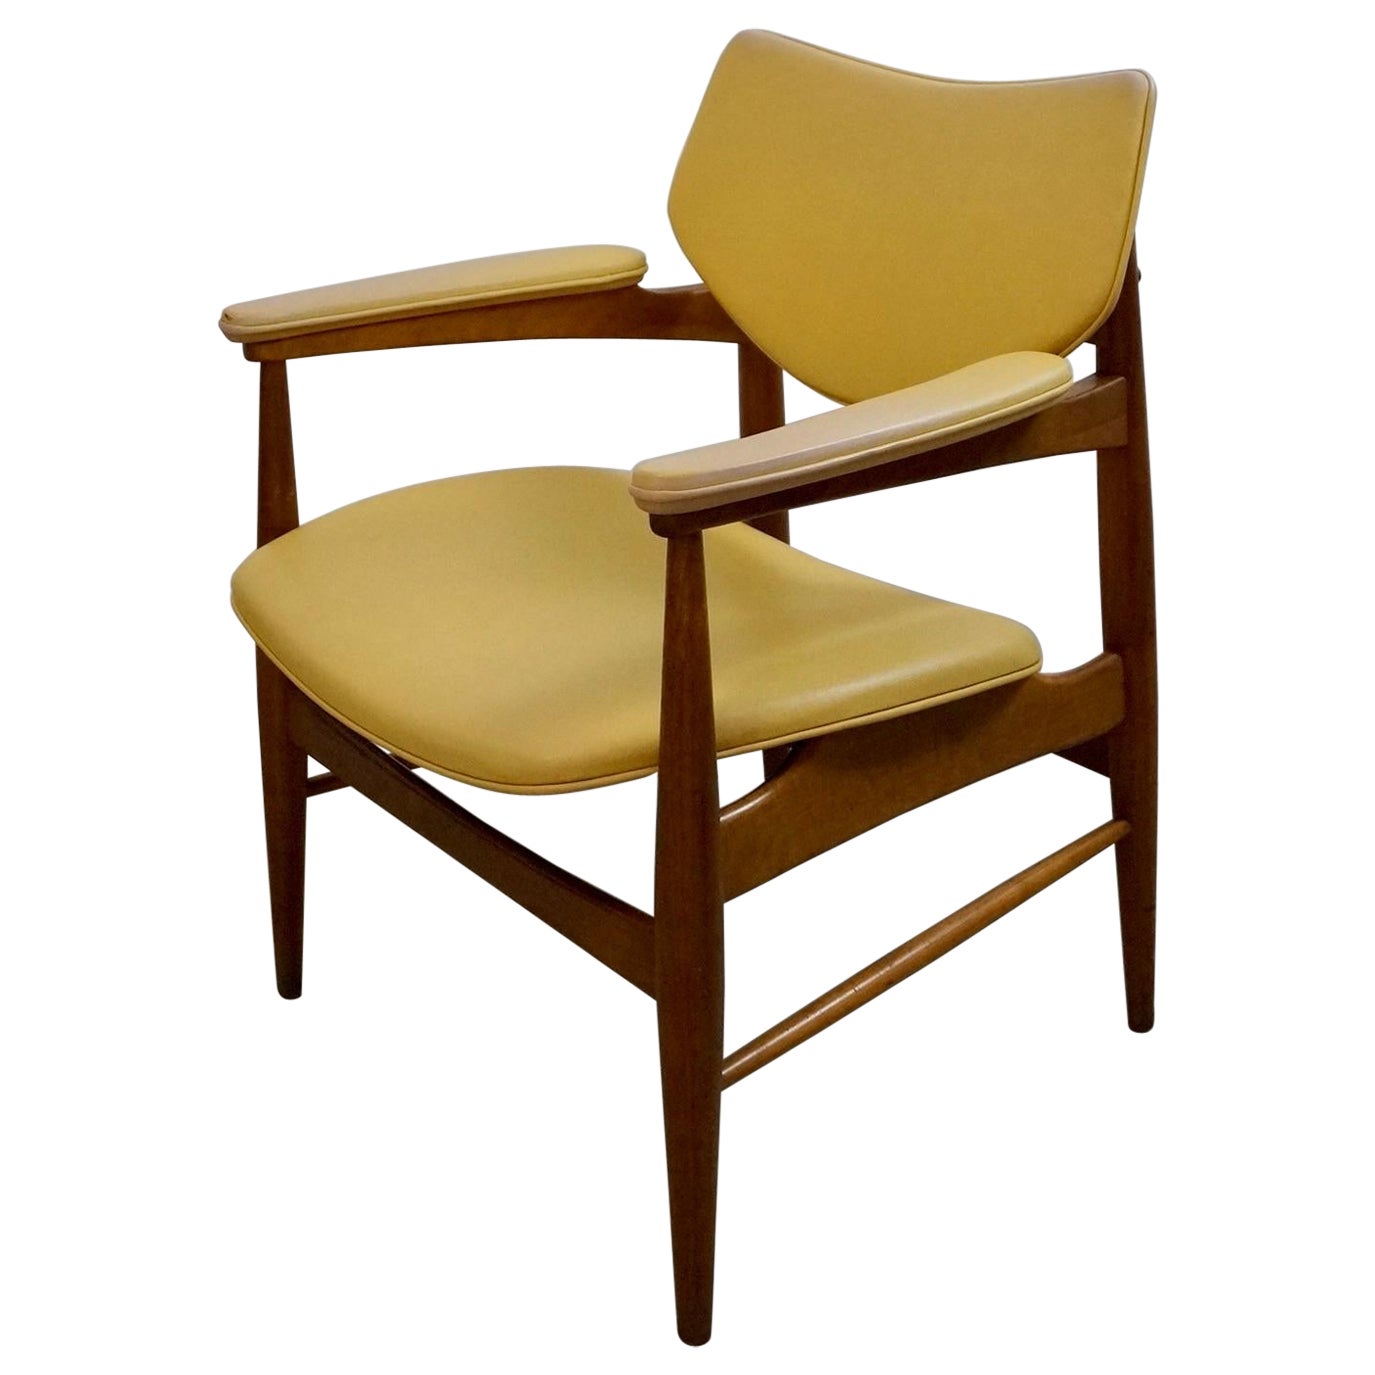 1950's Mid-Century Modern Walnut Armchair by Thonet For Sale